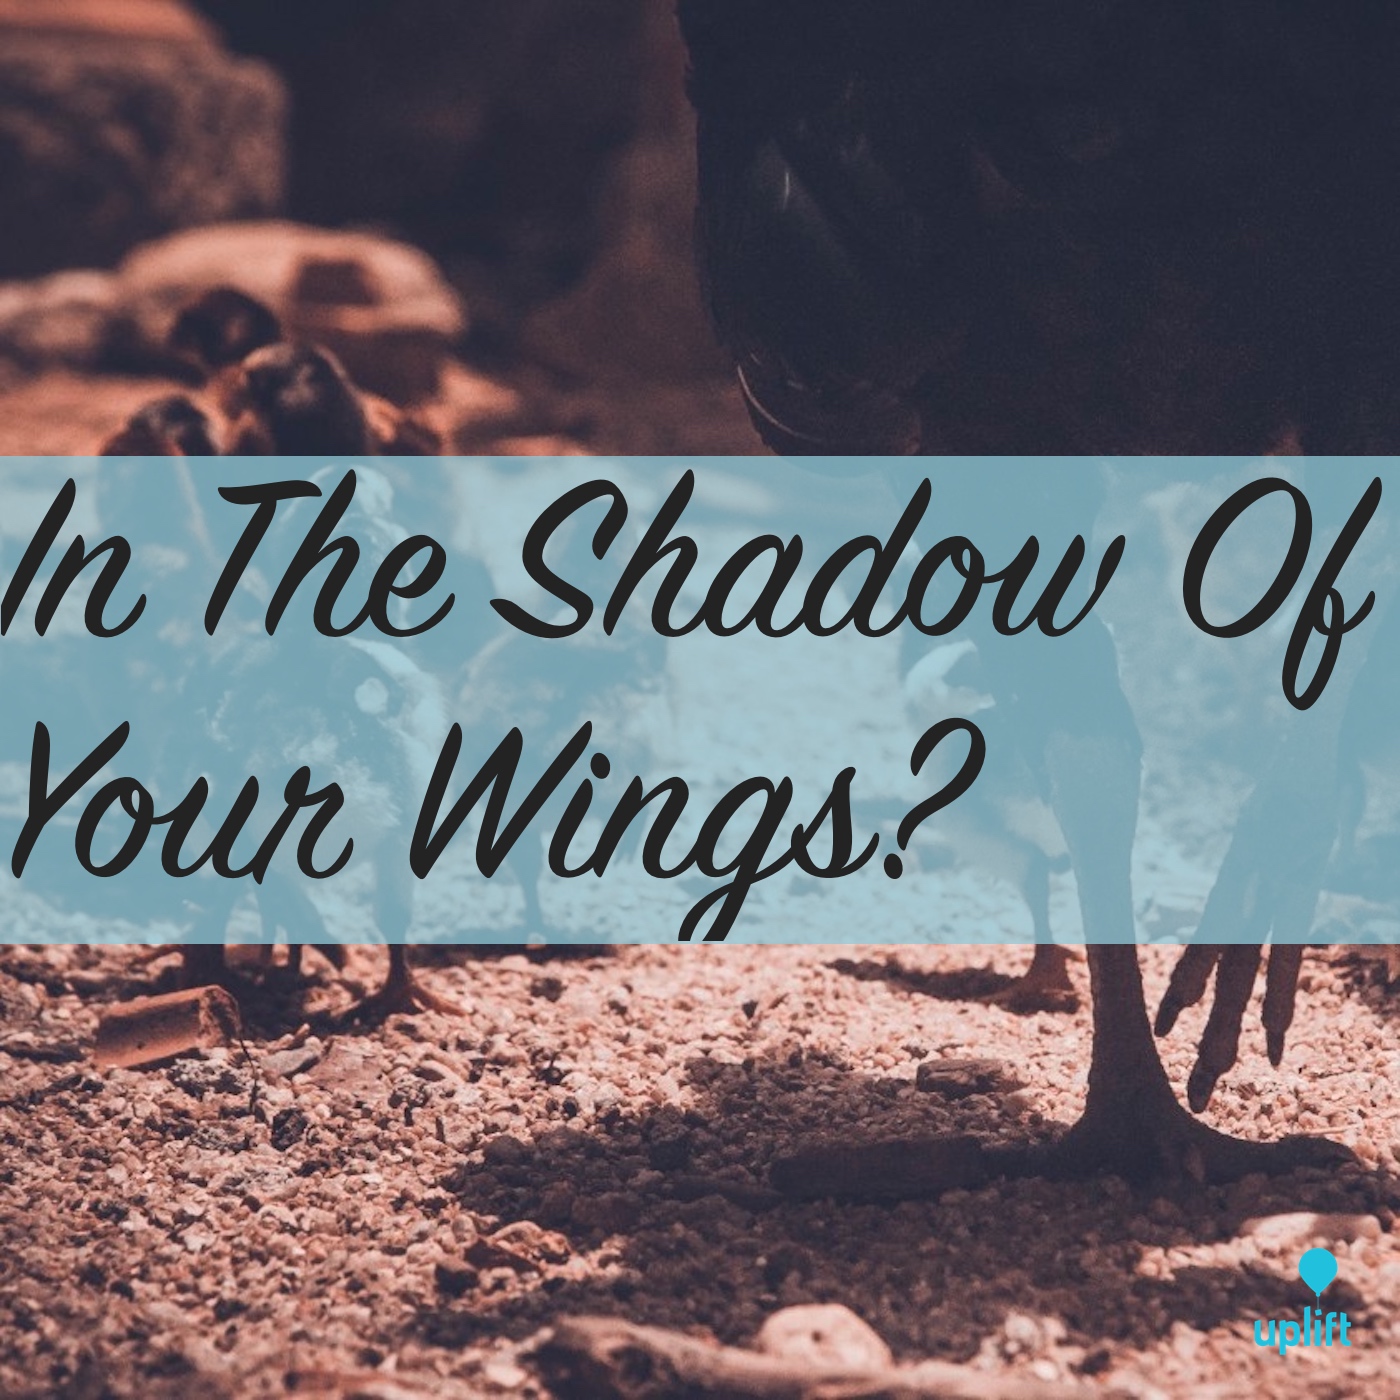 Episode 31: In The Shadow Of Your Wings?